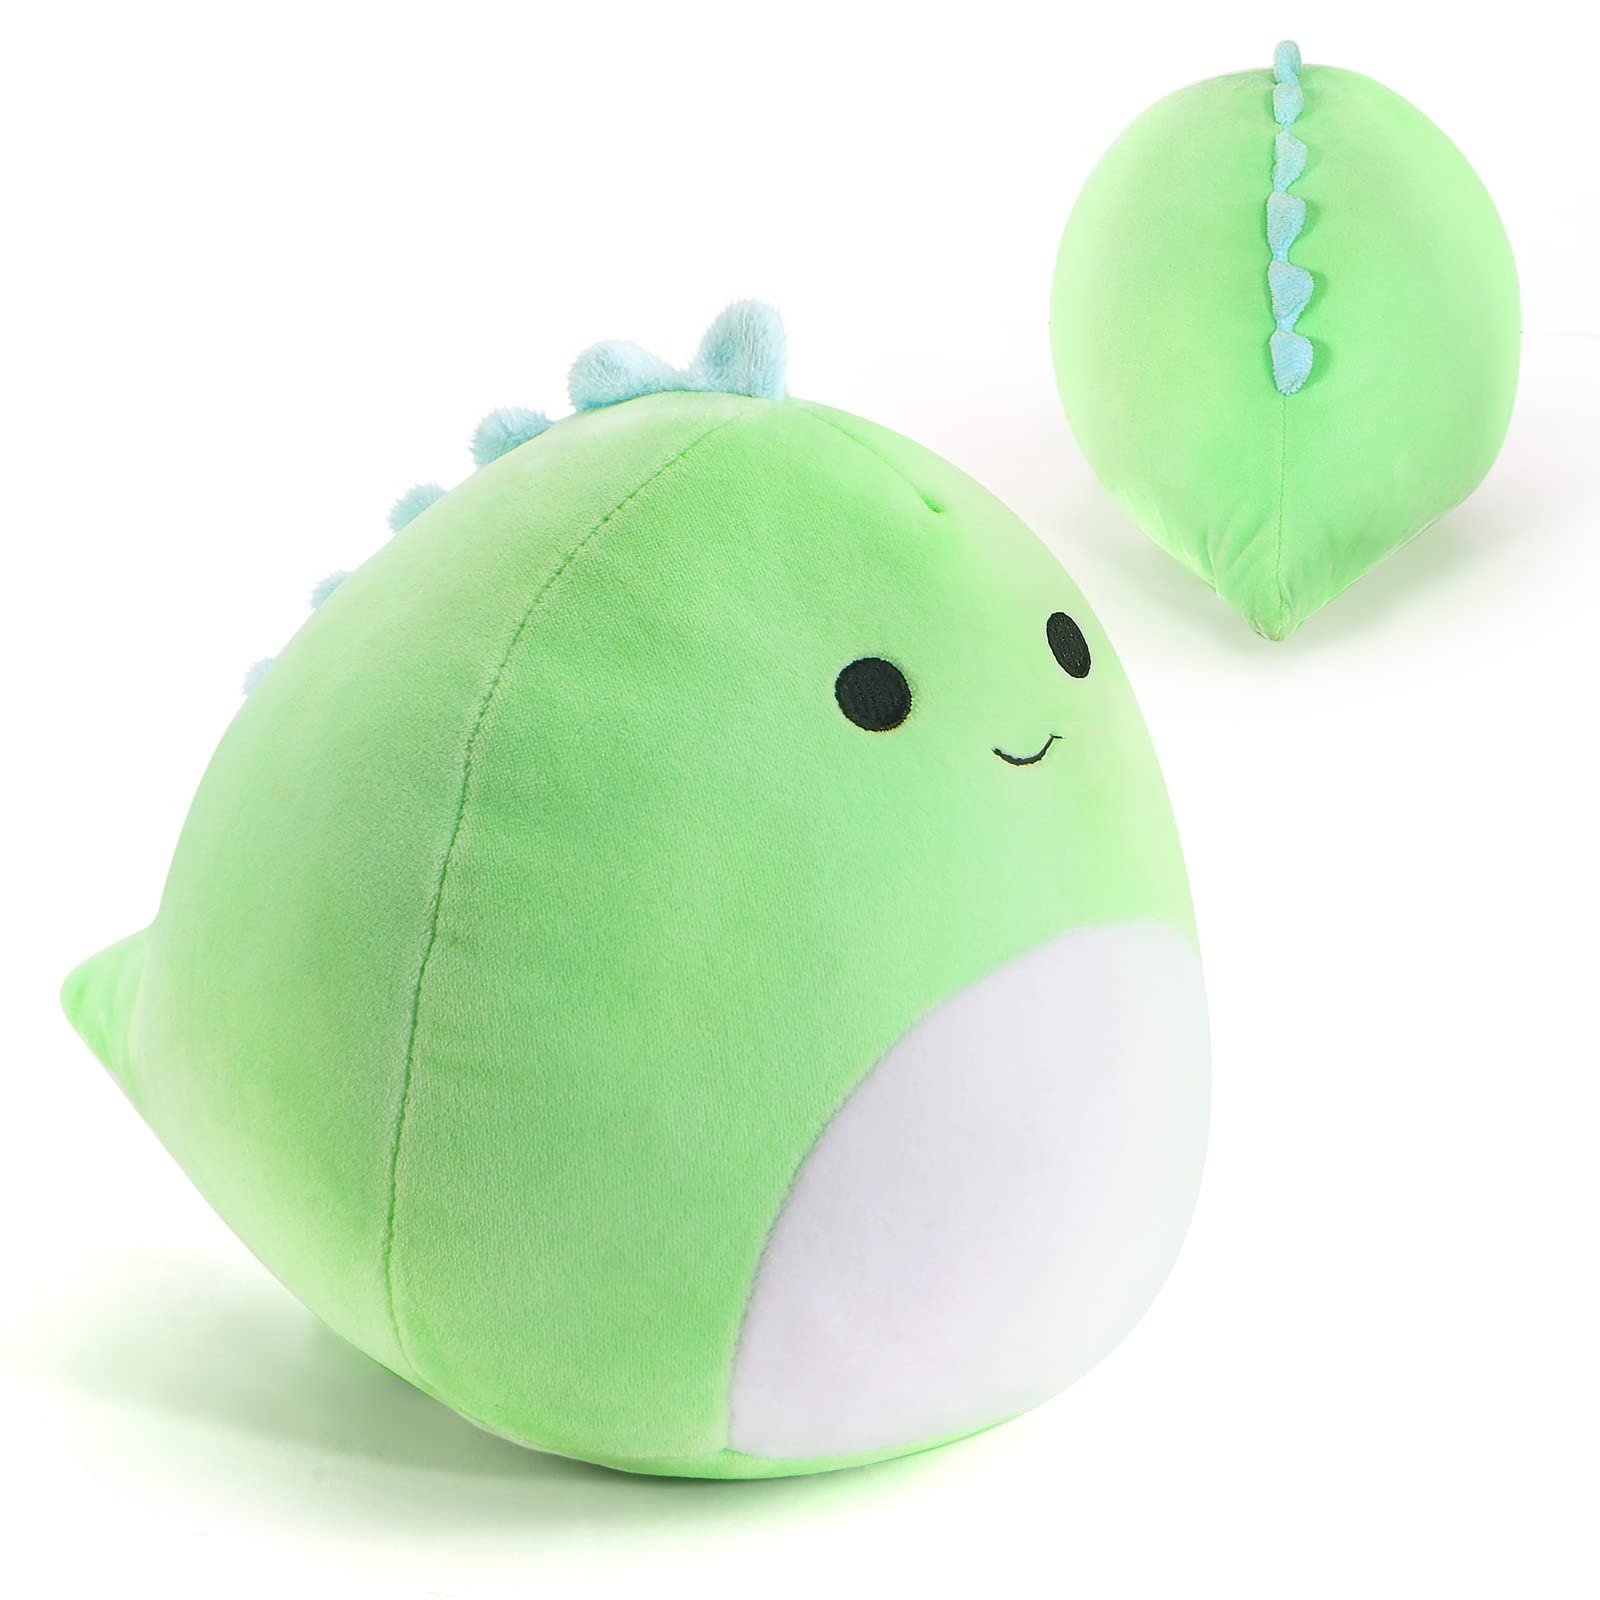 Dinosaur Plush Toys, Cute Plushies Soft Toys for Kids, 7.87Inch Stuffed Animal Toys Dino Plush Cuddly Toy for Babies Girls Bedding Sleeping Pillow, Newborn Birthday Gift for Home Decoration by KOUMIN